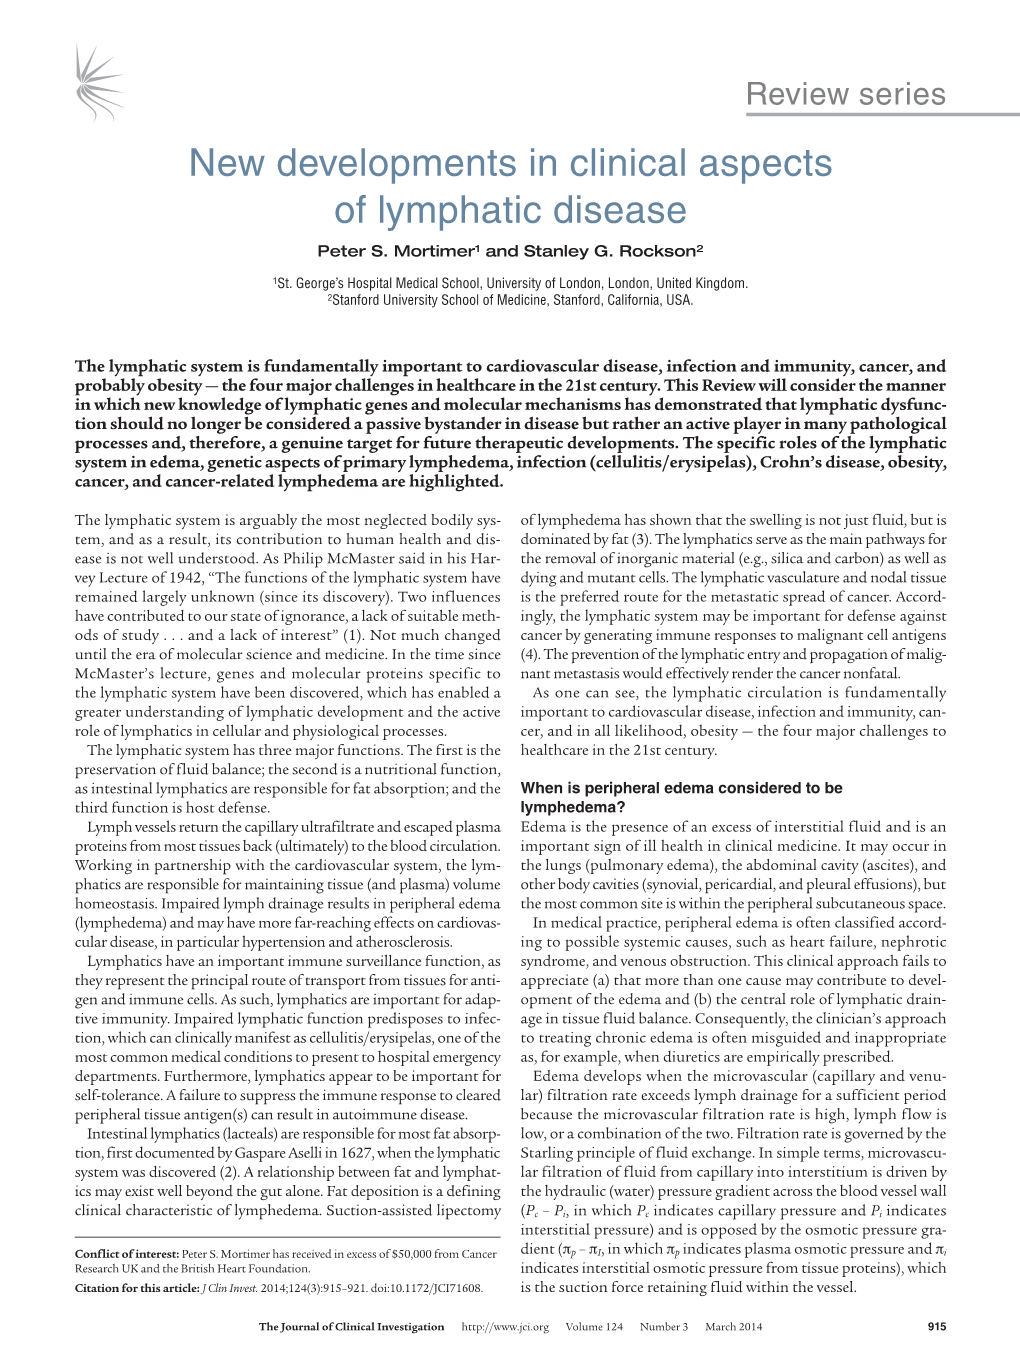 New Developments in Clinical Aspects of Lymphatic Disease Peter S